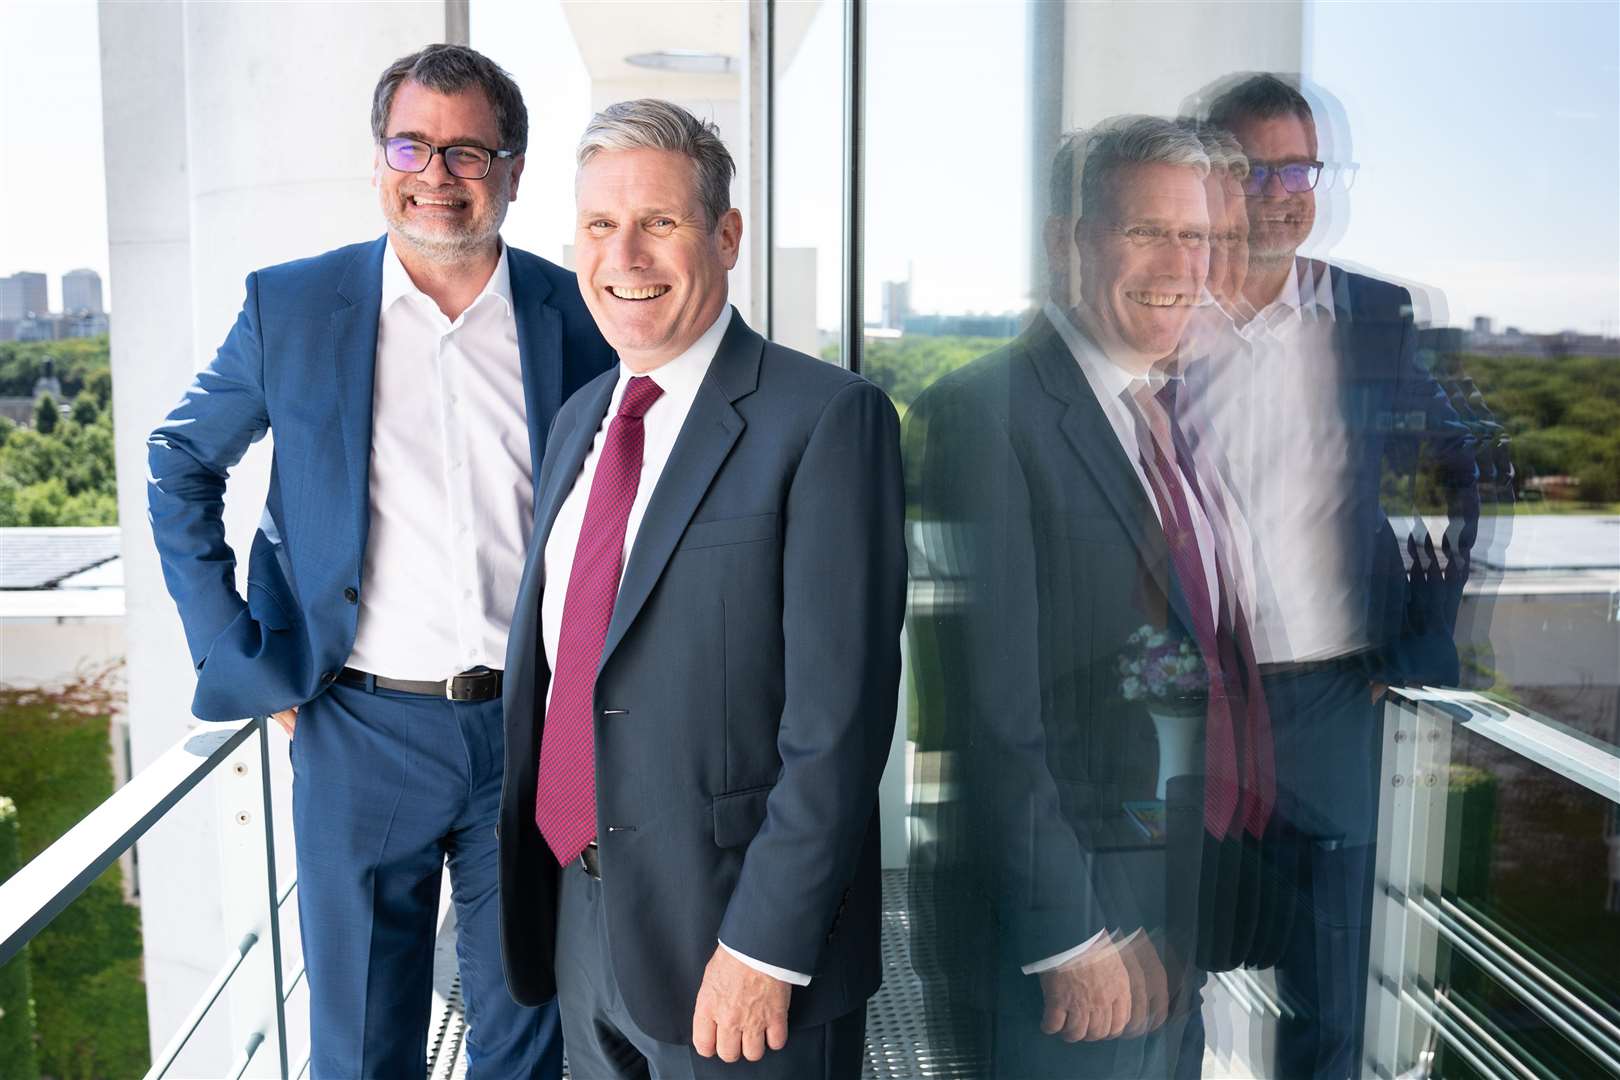 Labour leader Sir Keir Starmer met Wolfgang Schmidt, federal minister for special affairs, at the Chancellery in Berlin (Stefan Rousseau/PA)